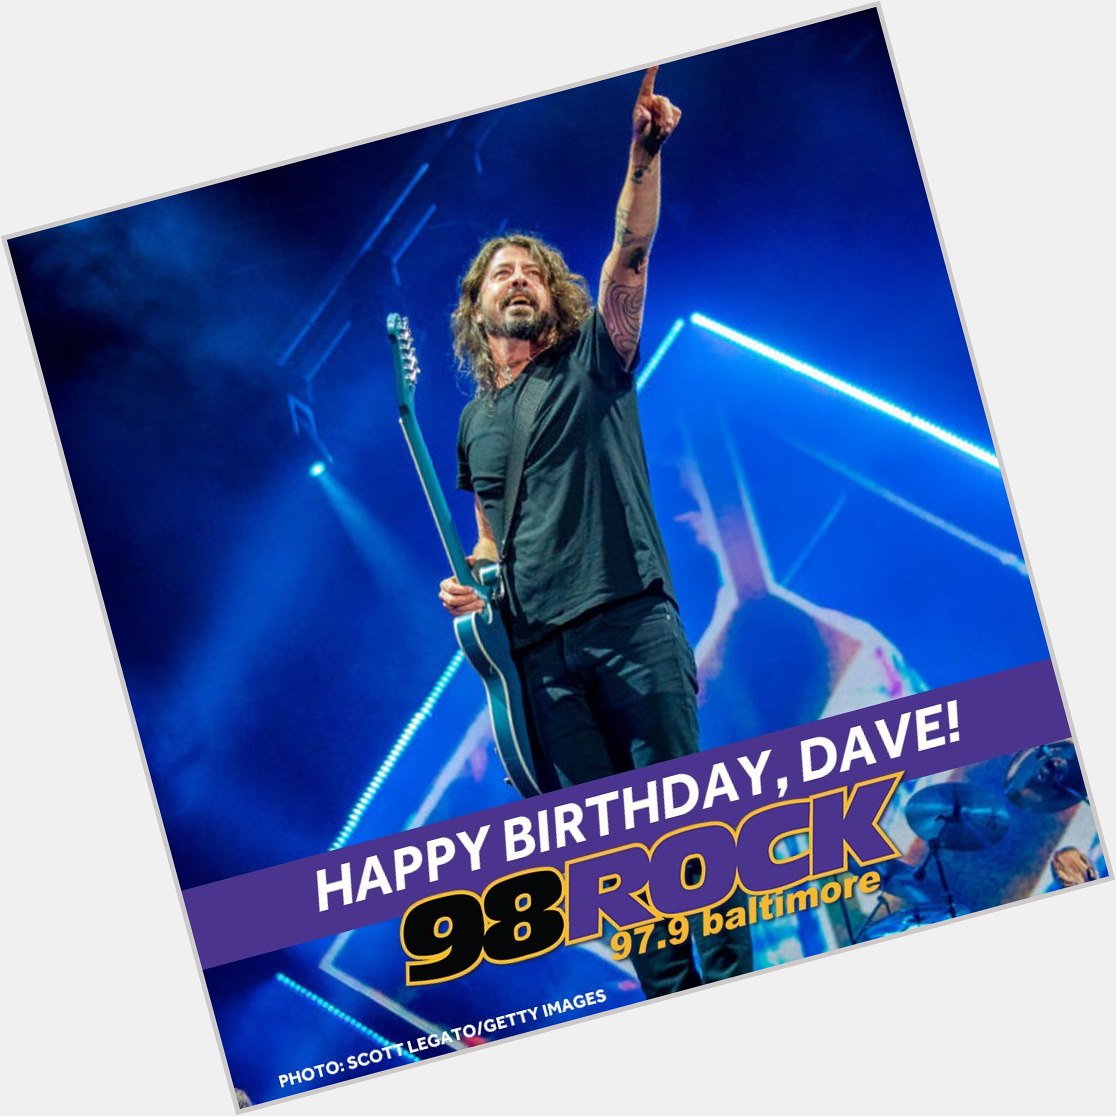 How about a little birthday shout out to the one, the only, Mr. Dave Grohl! Happy Birthday, Dave! 